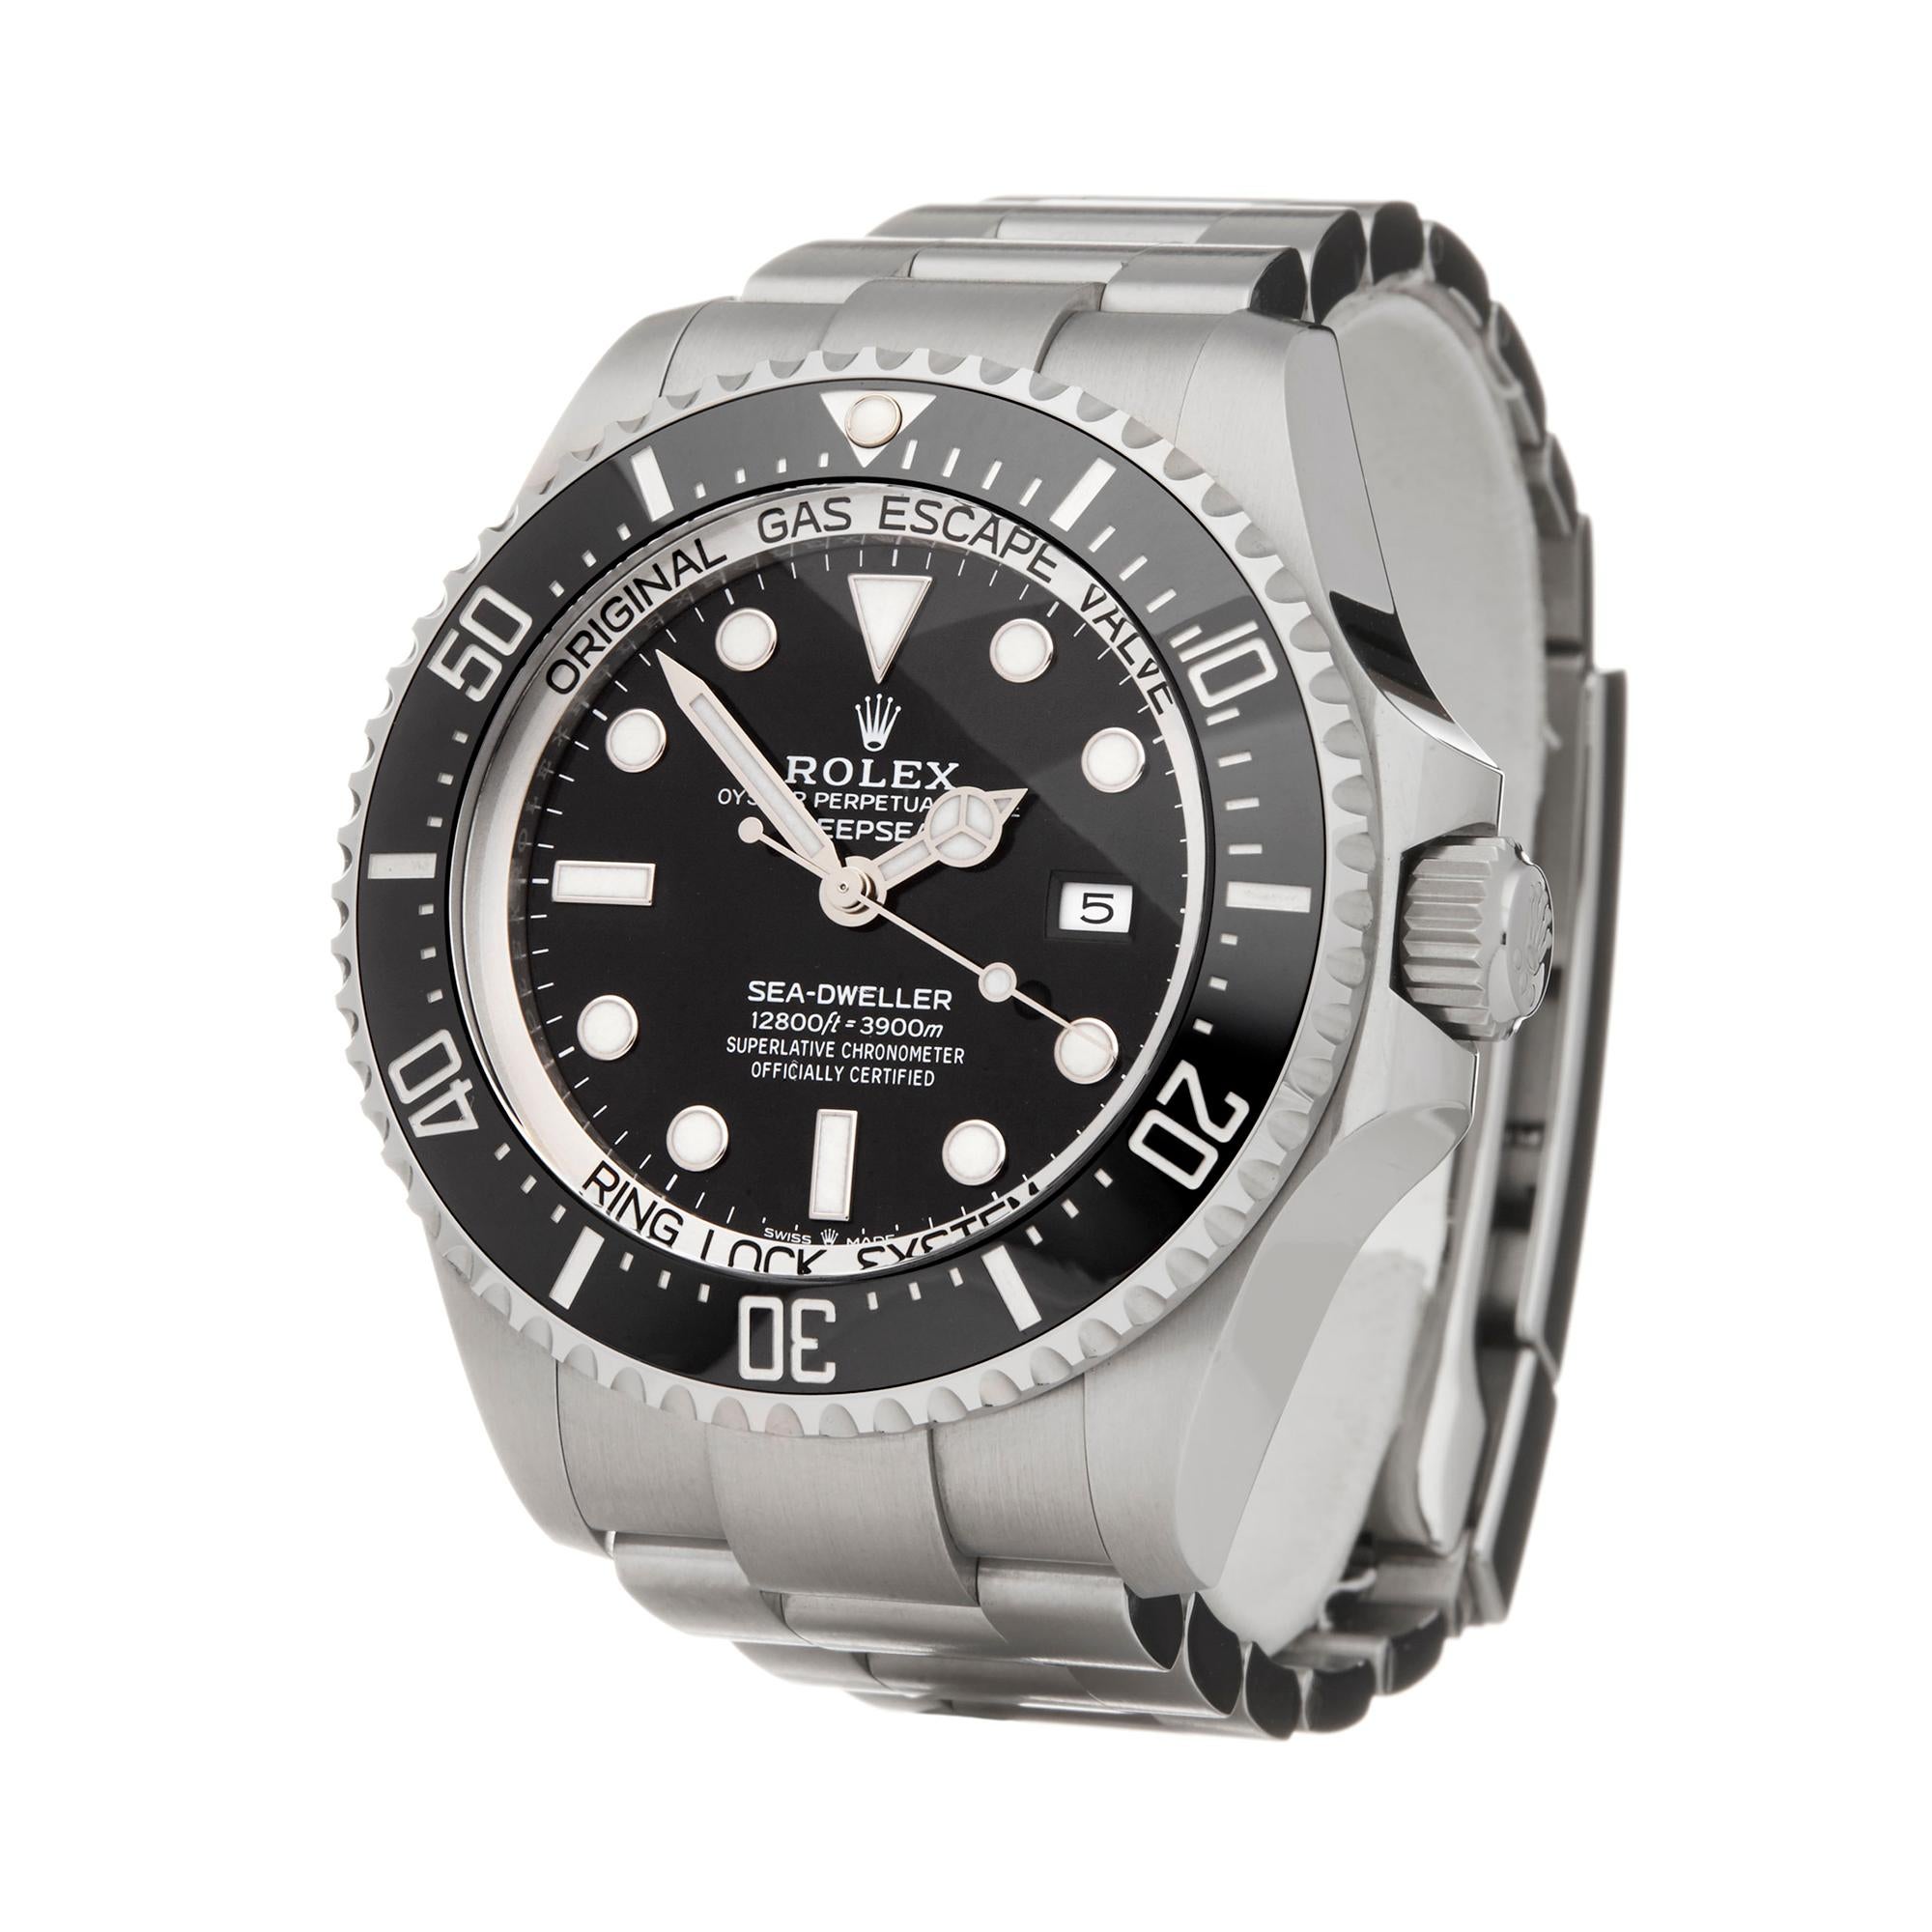 Ref: W6207
Manufacturer: Rolex
Model: Sea-Dweller 
Model Ref: 126660
Age: 17th April 2019
Gender: Mens
Complete With: Box, Manuals, Guarantee, Card Holder & Swing Tag 
Dial: Black
Glass: Sapphire Crystal
Movement: Automatic
Water Resistance: To